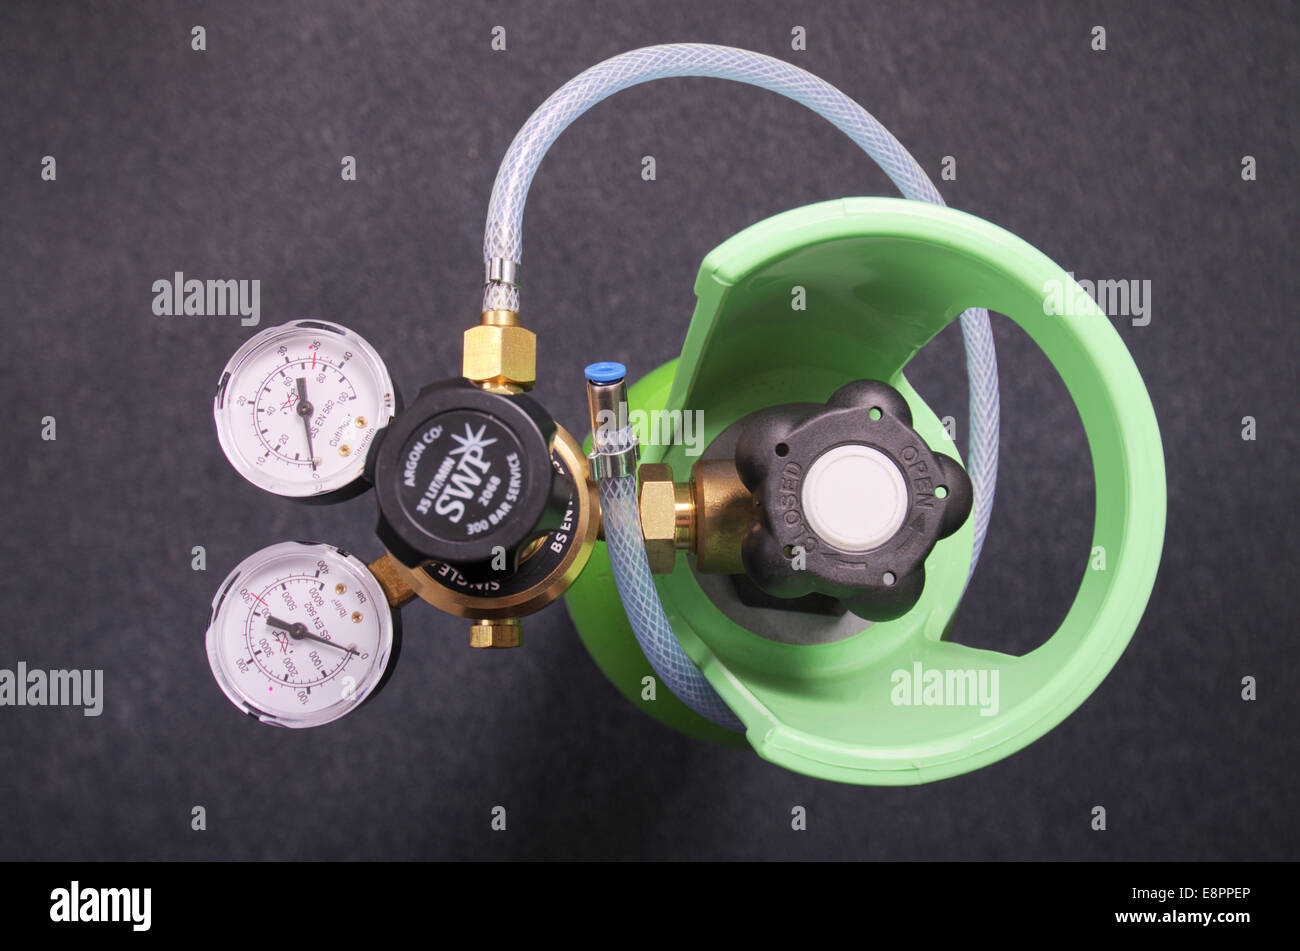 Small Ten Litre Size Argon CO2 Mix Gas Bottle With Regulator For MIG Welding  Stock Photo - Alamy